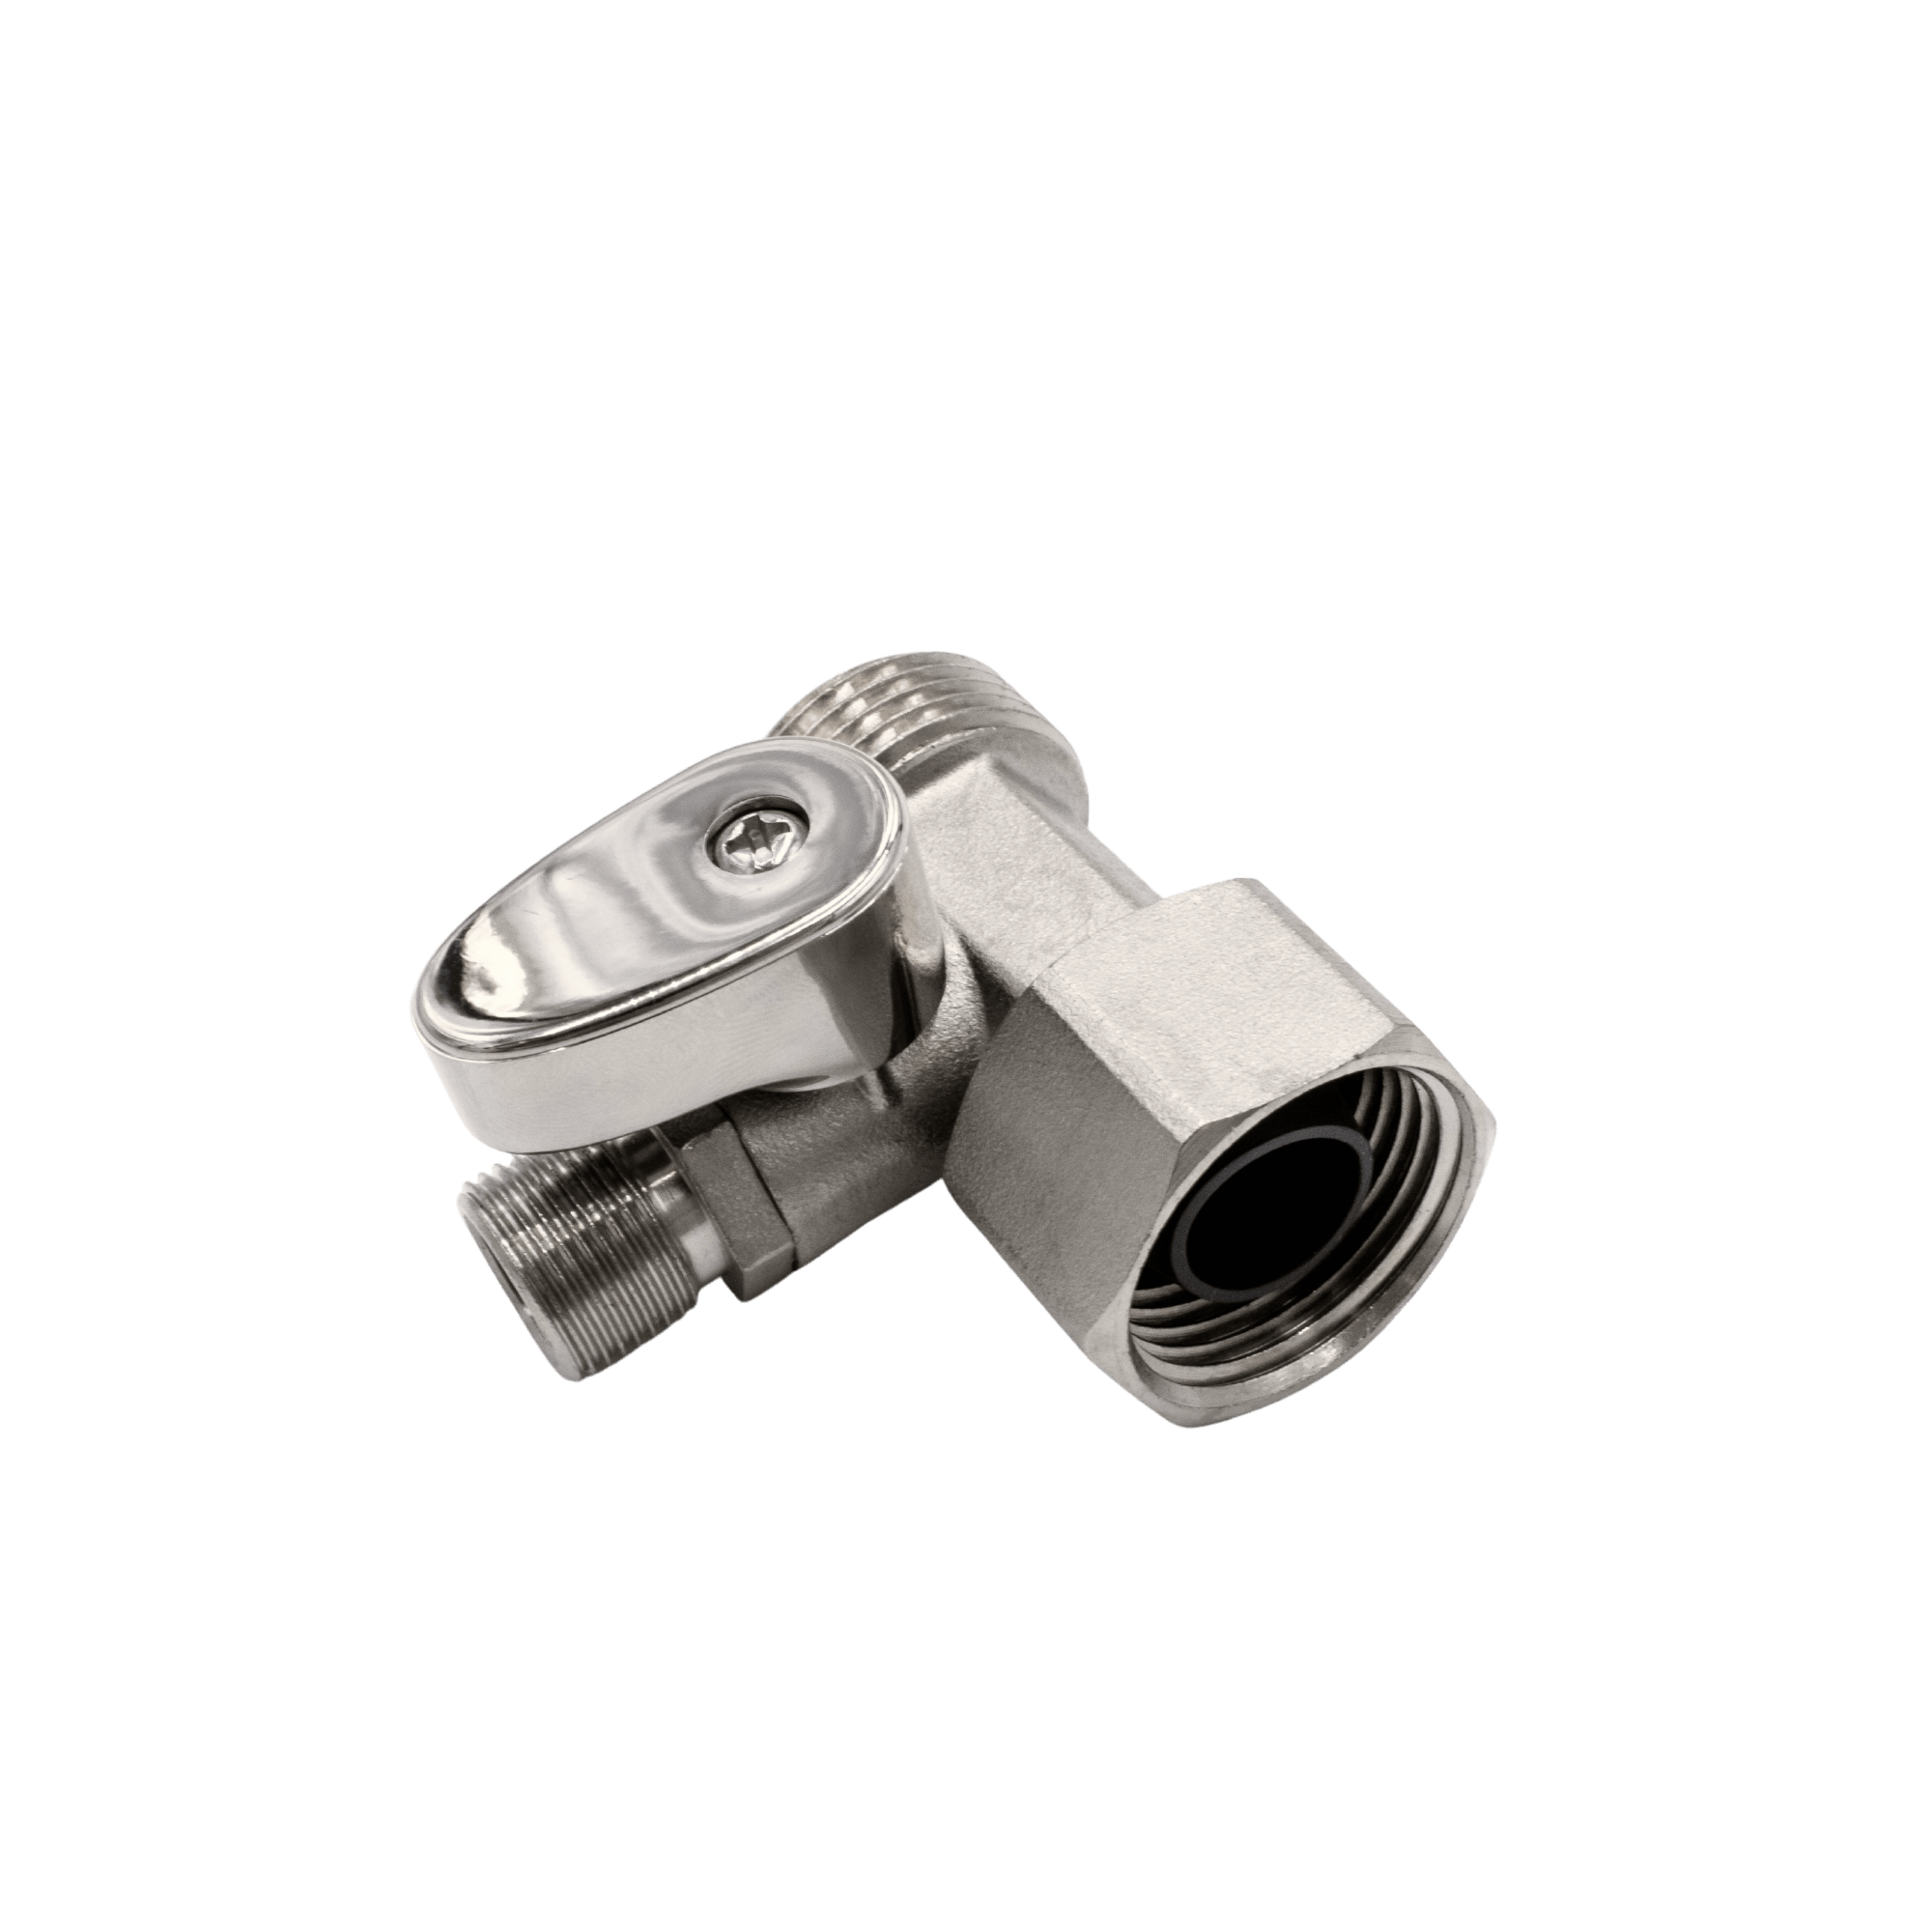 Cold Water, Teardrop shaped, Nickel, Shut-Off T-Adapter with ball-valve